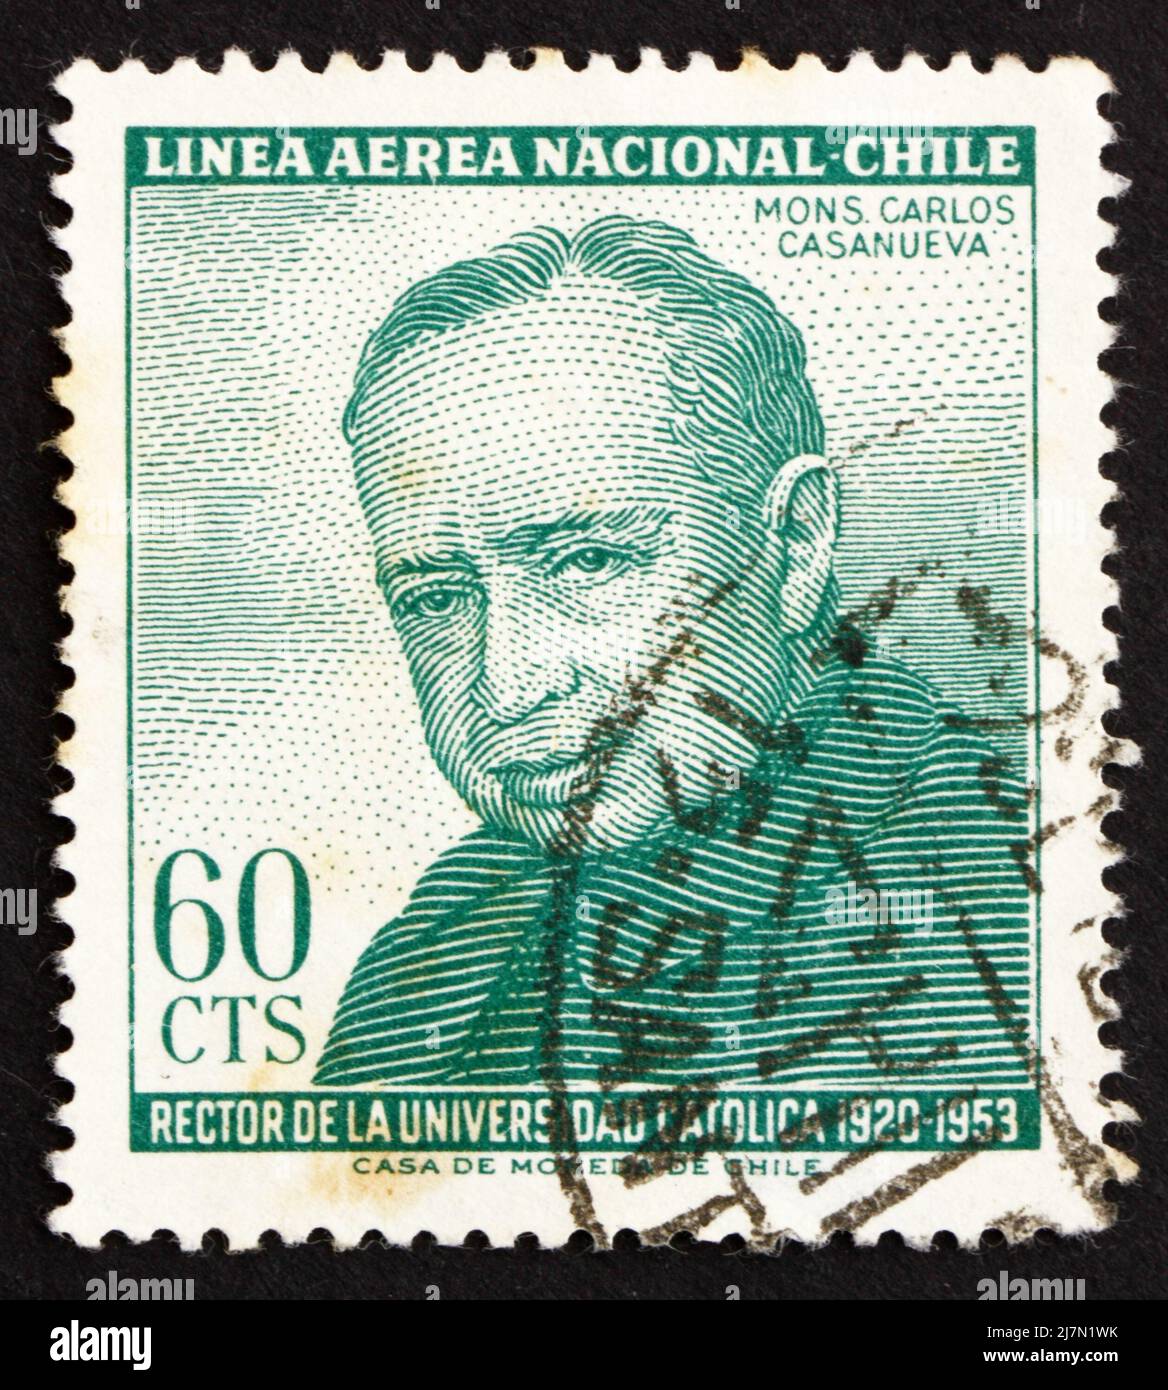 CHILE - CIRCA 1965: a stamp printed in the Chile shows Msgr. Carlos Casanueva, Rector of the Catholic University, circa 1965 Stock Photo